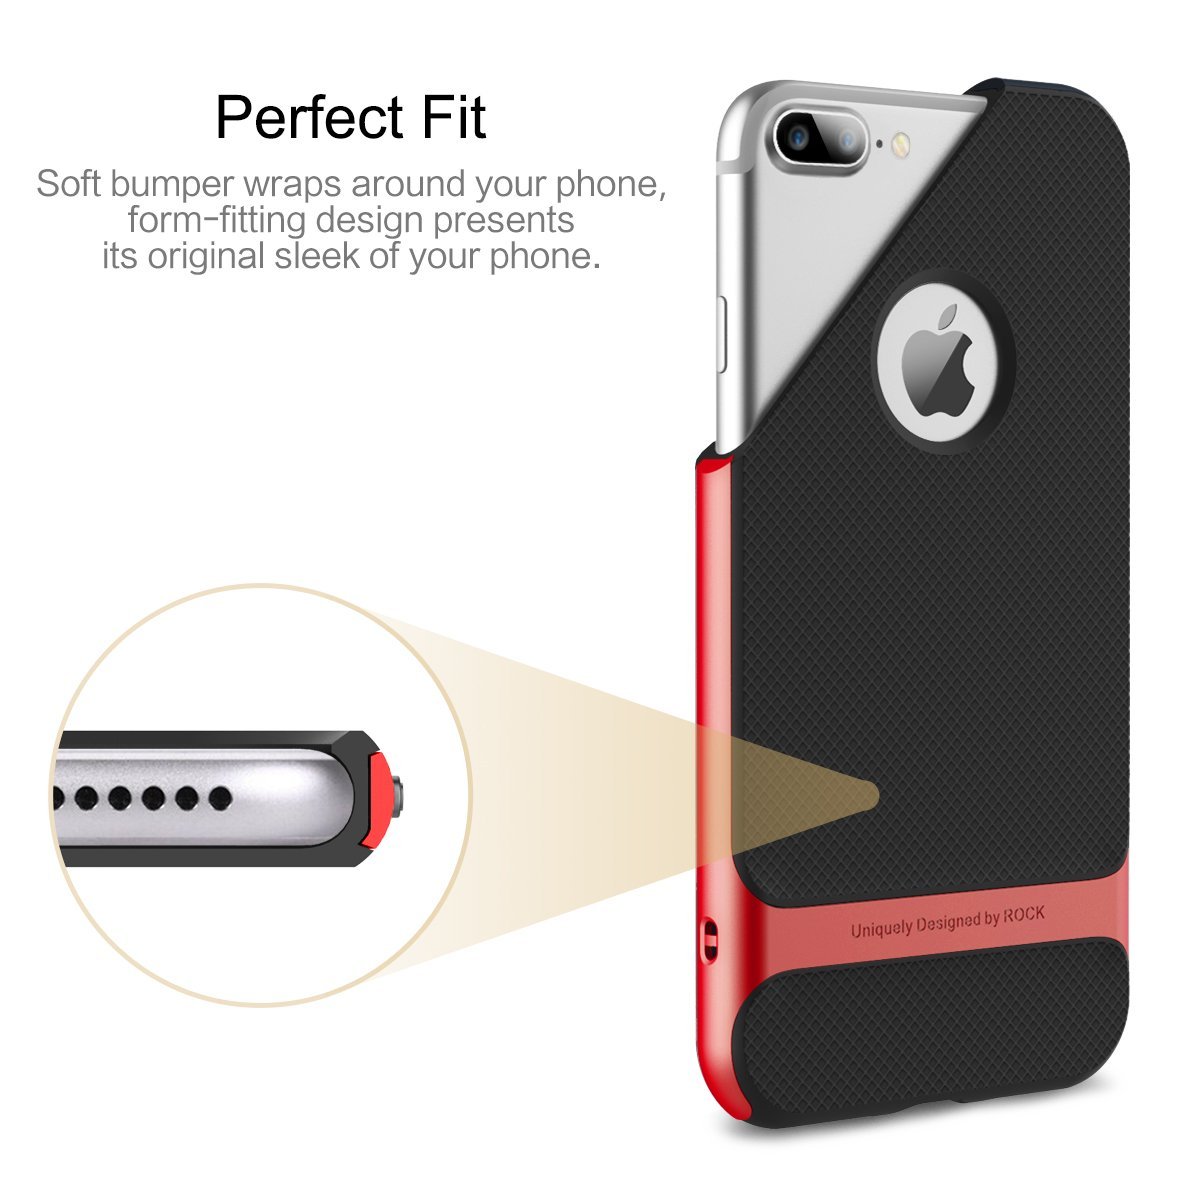 Royce Series By Rock Dual Layer Thin & Slim Shockproof Case for iPhone 7 Plus - Black/Red